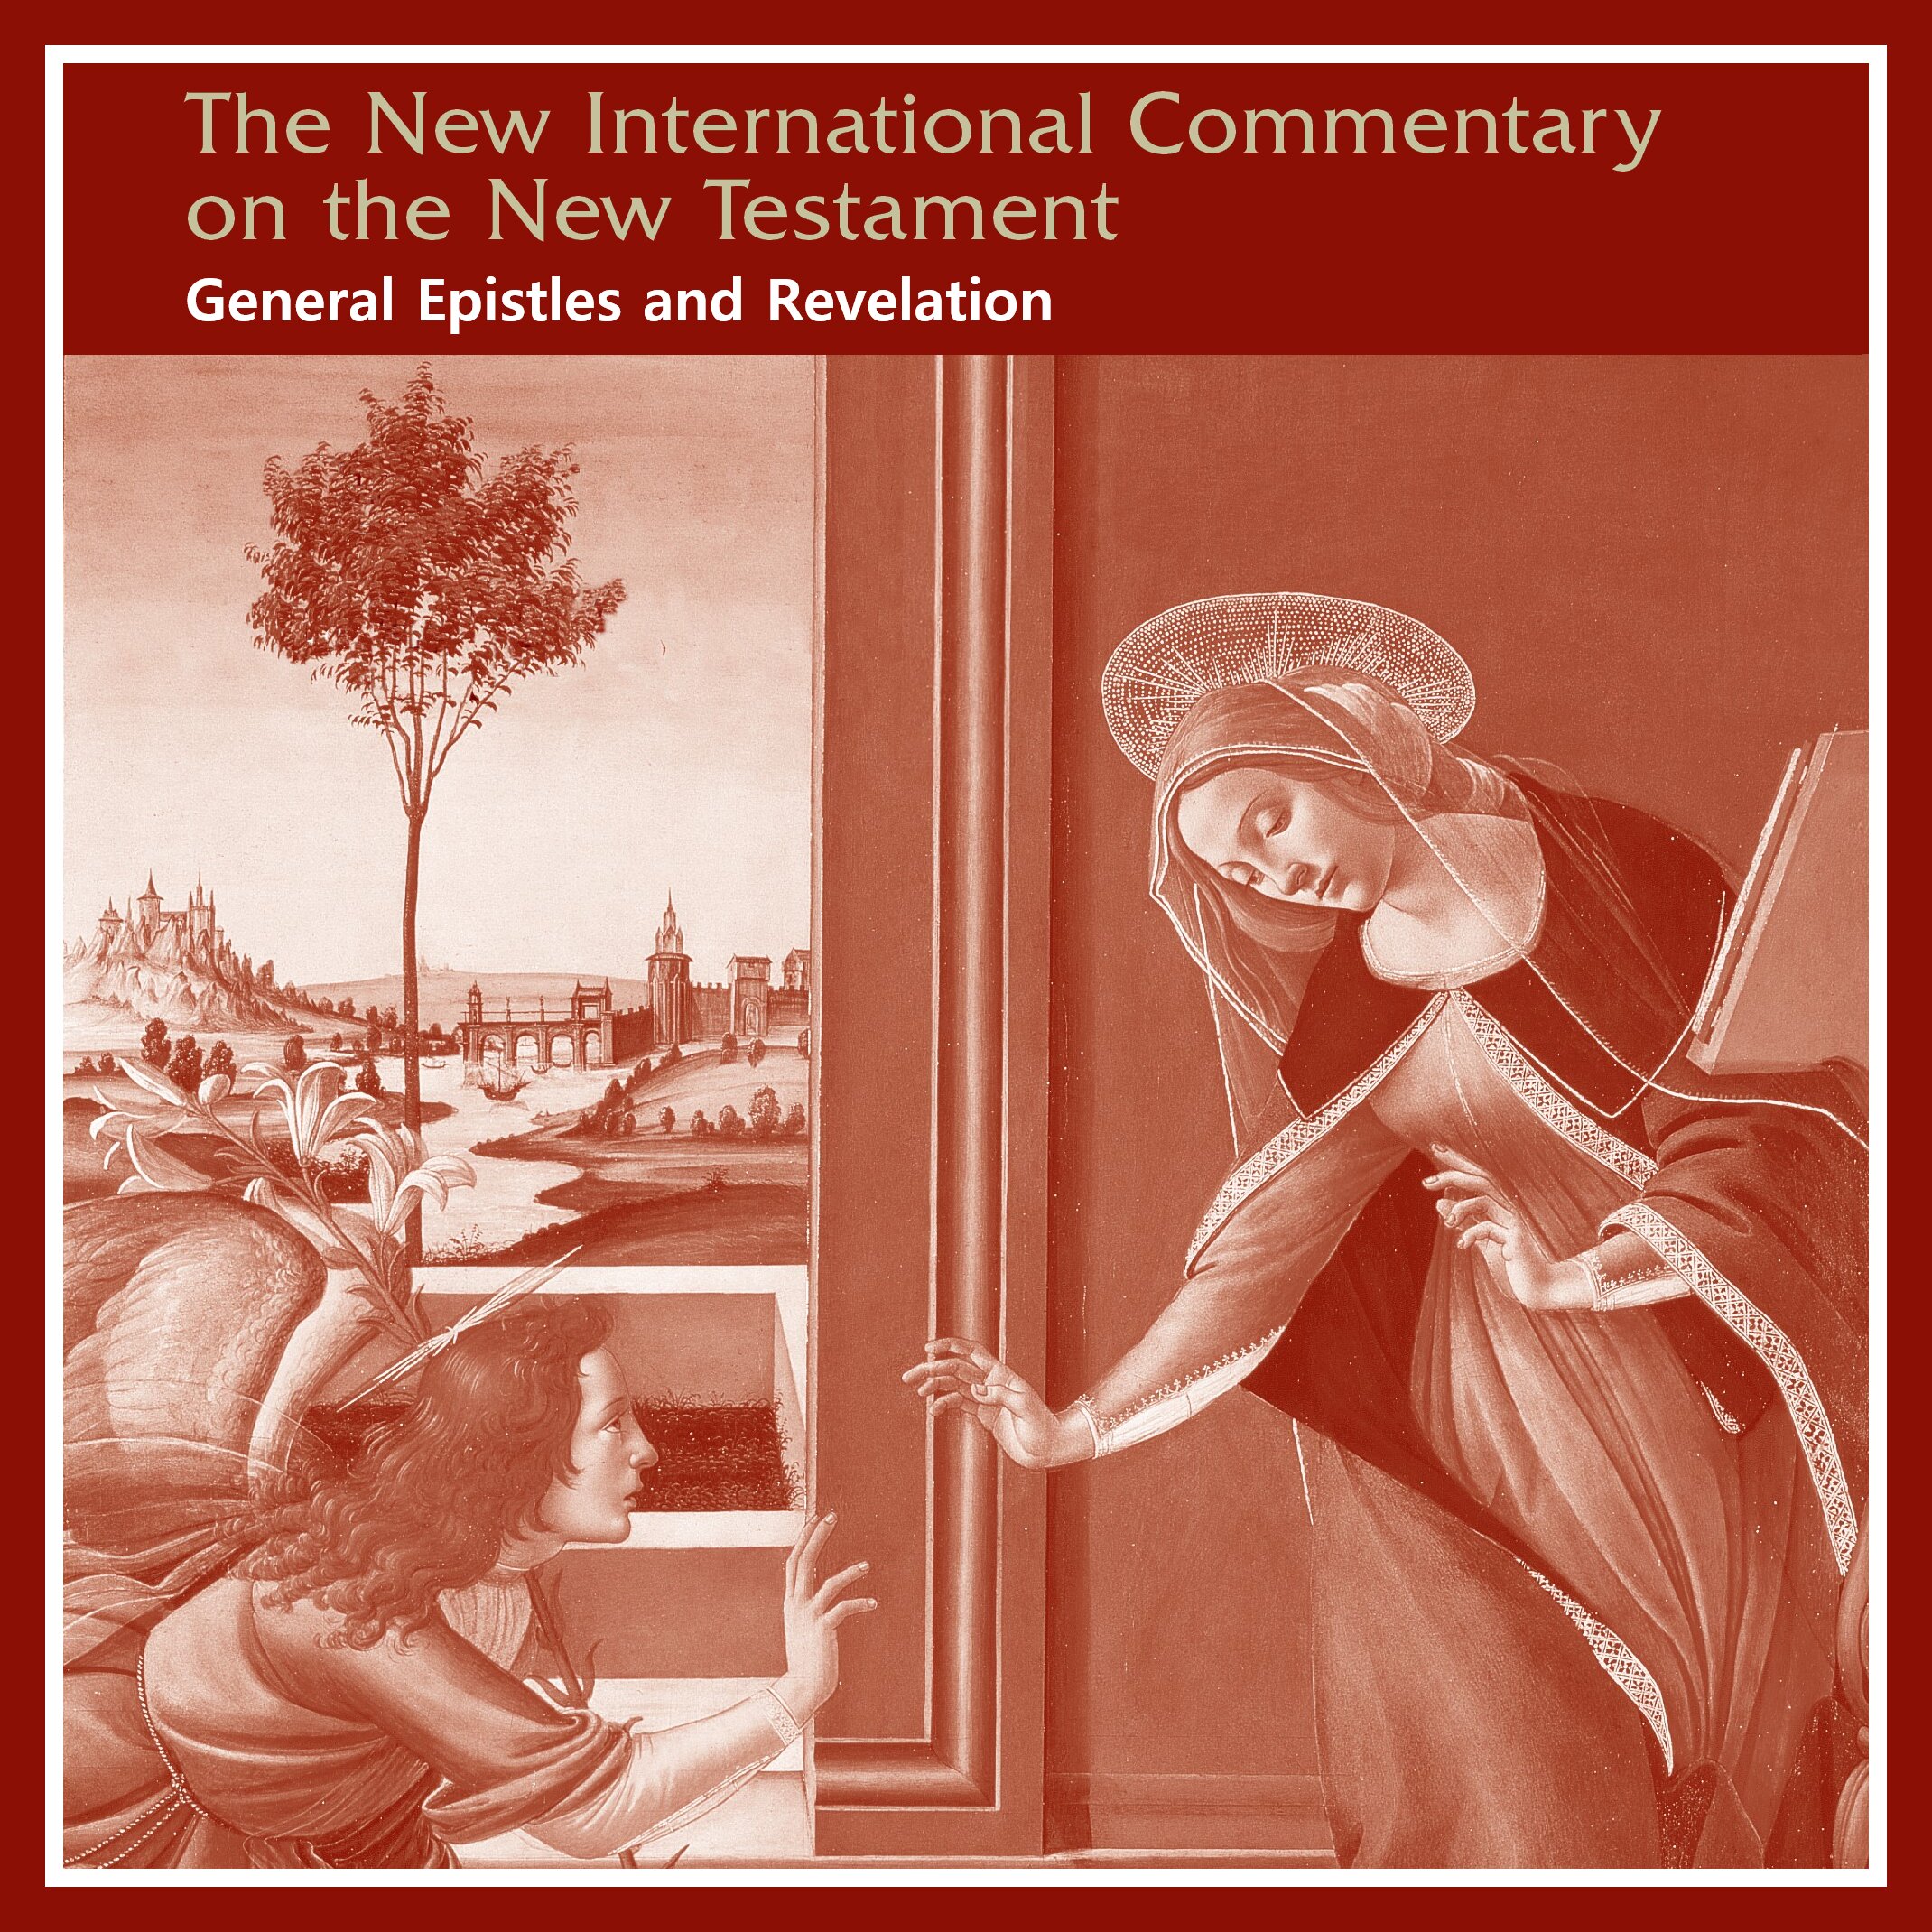 General Epistles and Revelation, 5 vols. (The New International Commentary on the New Testament | NICNT)